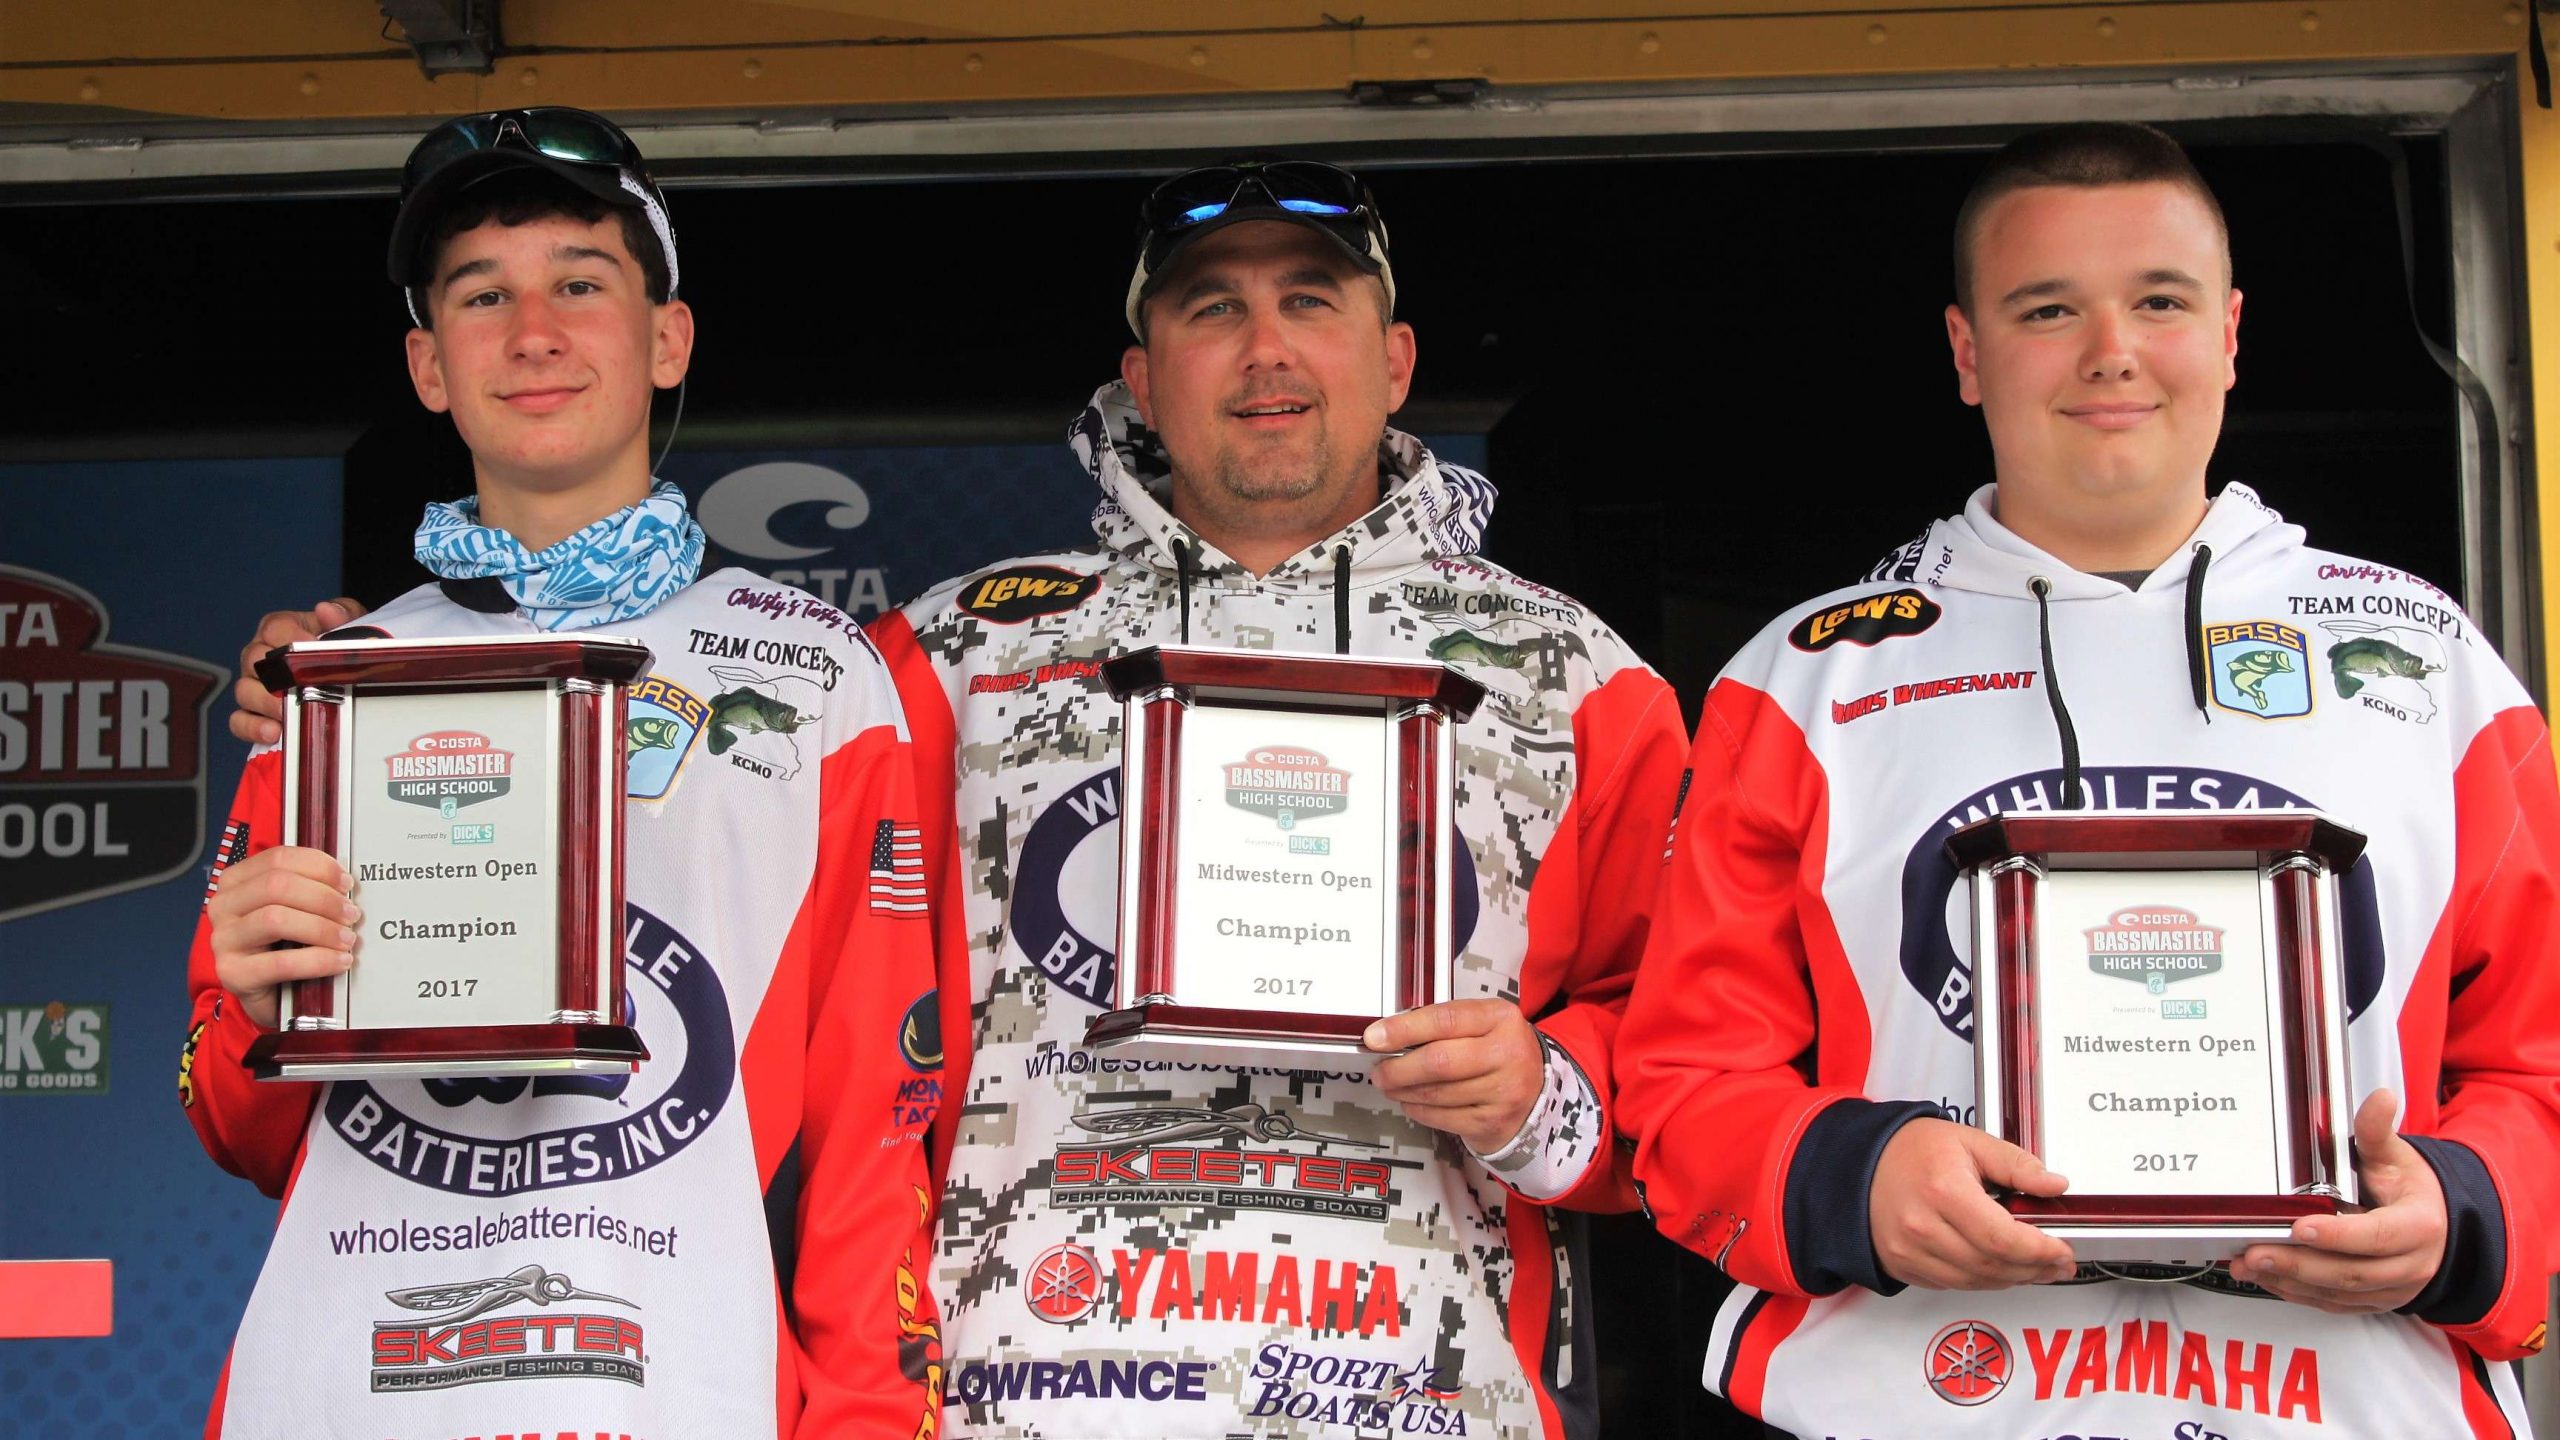 And there they are, the champions of the Costa Bassmaseter High School Midwest Open presented by DICK'S Sporting Goods! Pictured, from left, are Trevor Whisenant, his dad and boat captain Chris Whisenant, and Brett Lasley.